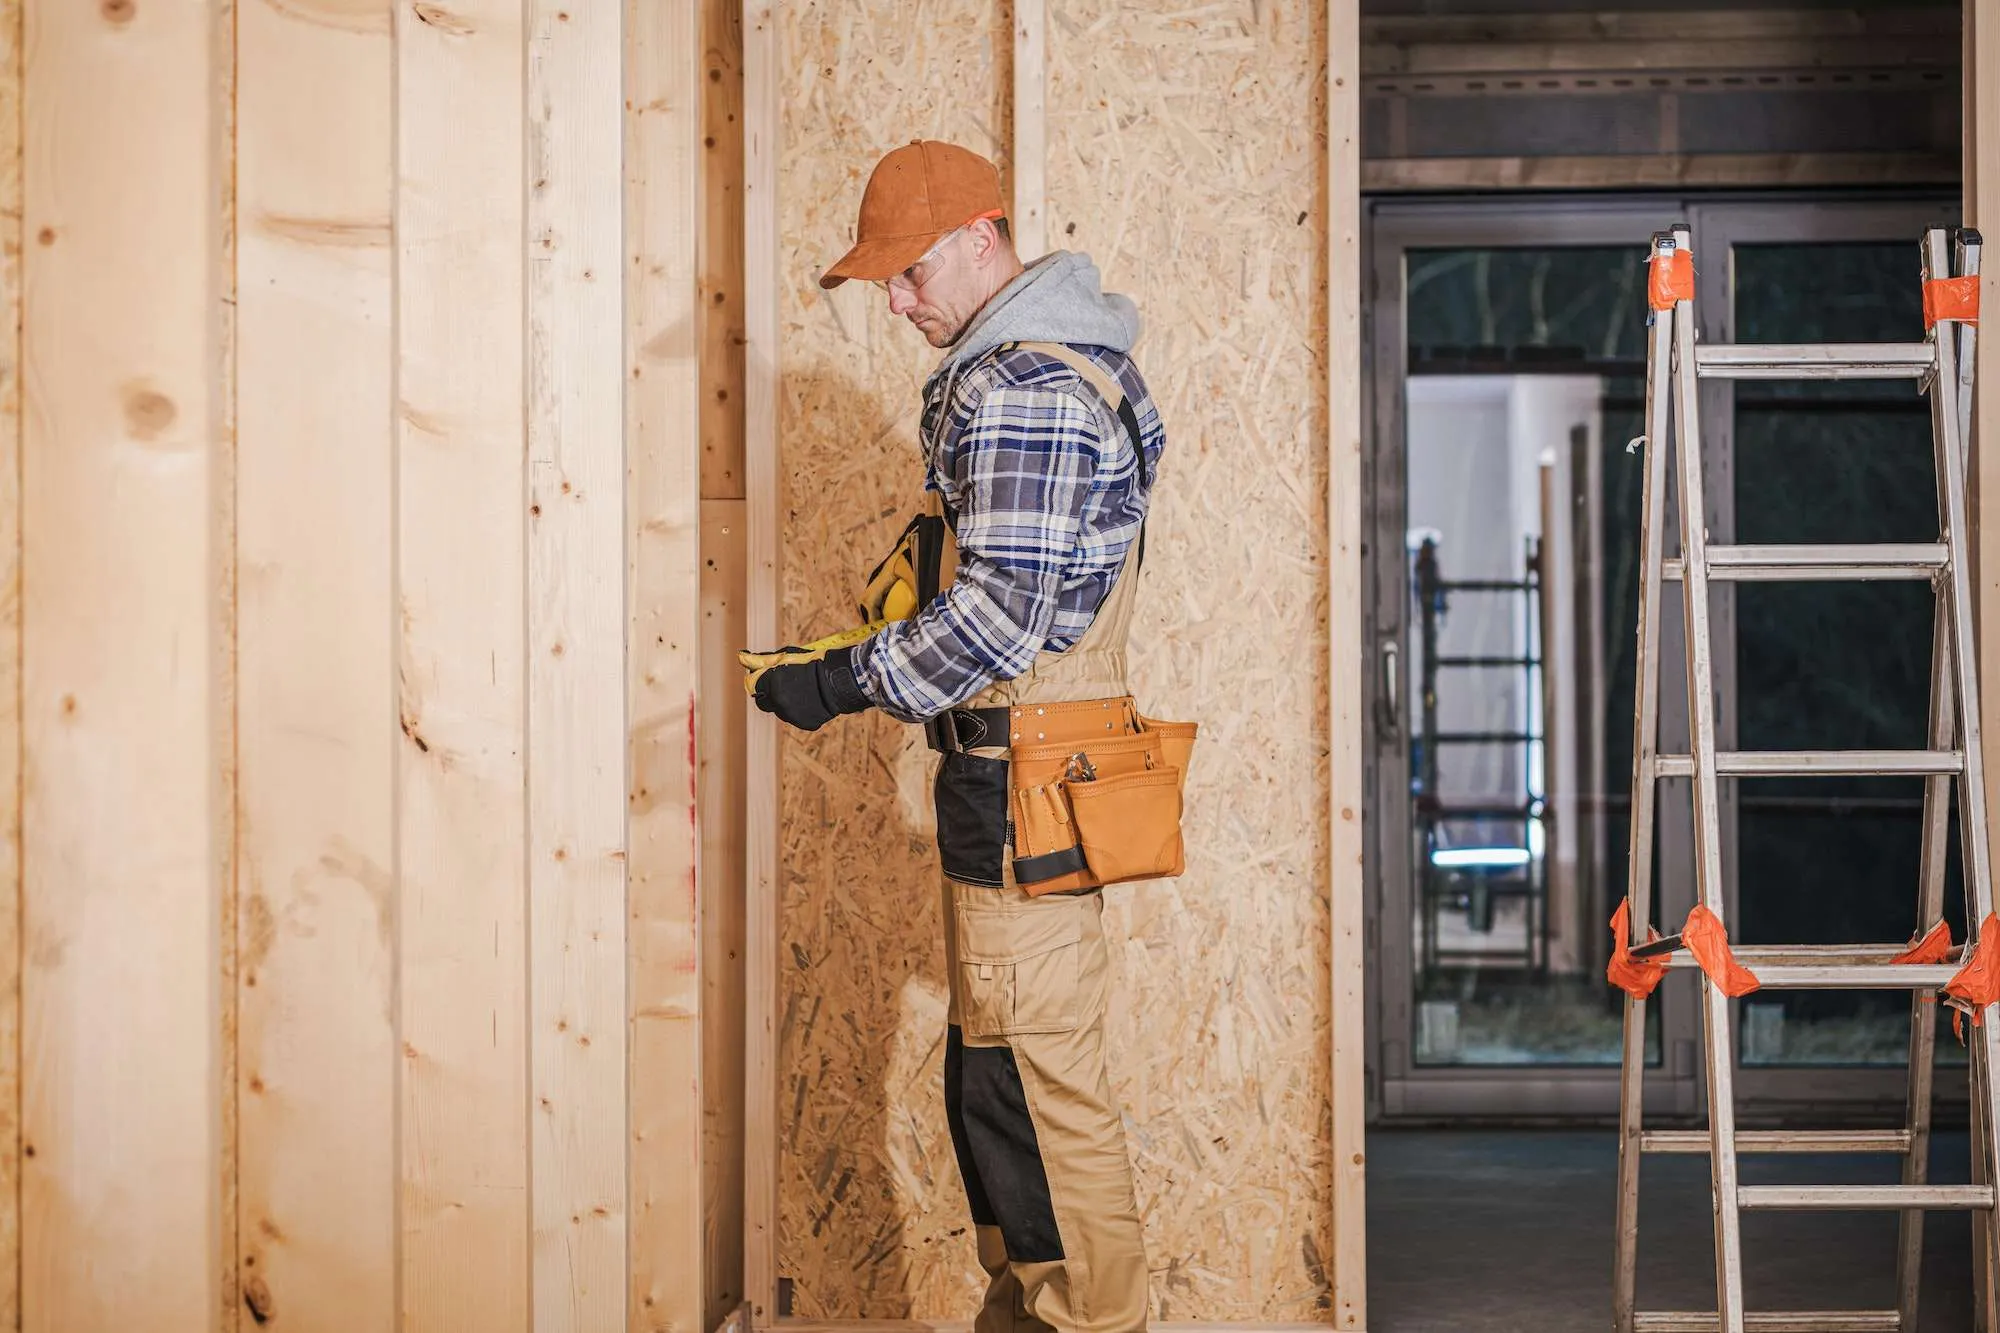 Secure your general contracting business in Colorado with our liability insurance, featuring access to 50+ carriers for the best rates and coverage. Call us today!